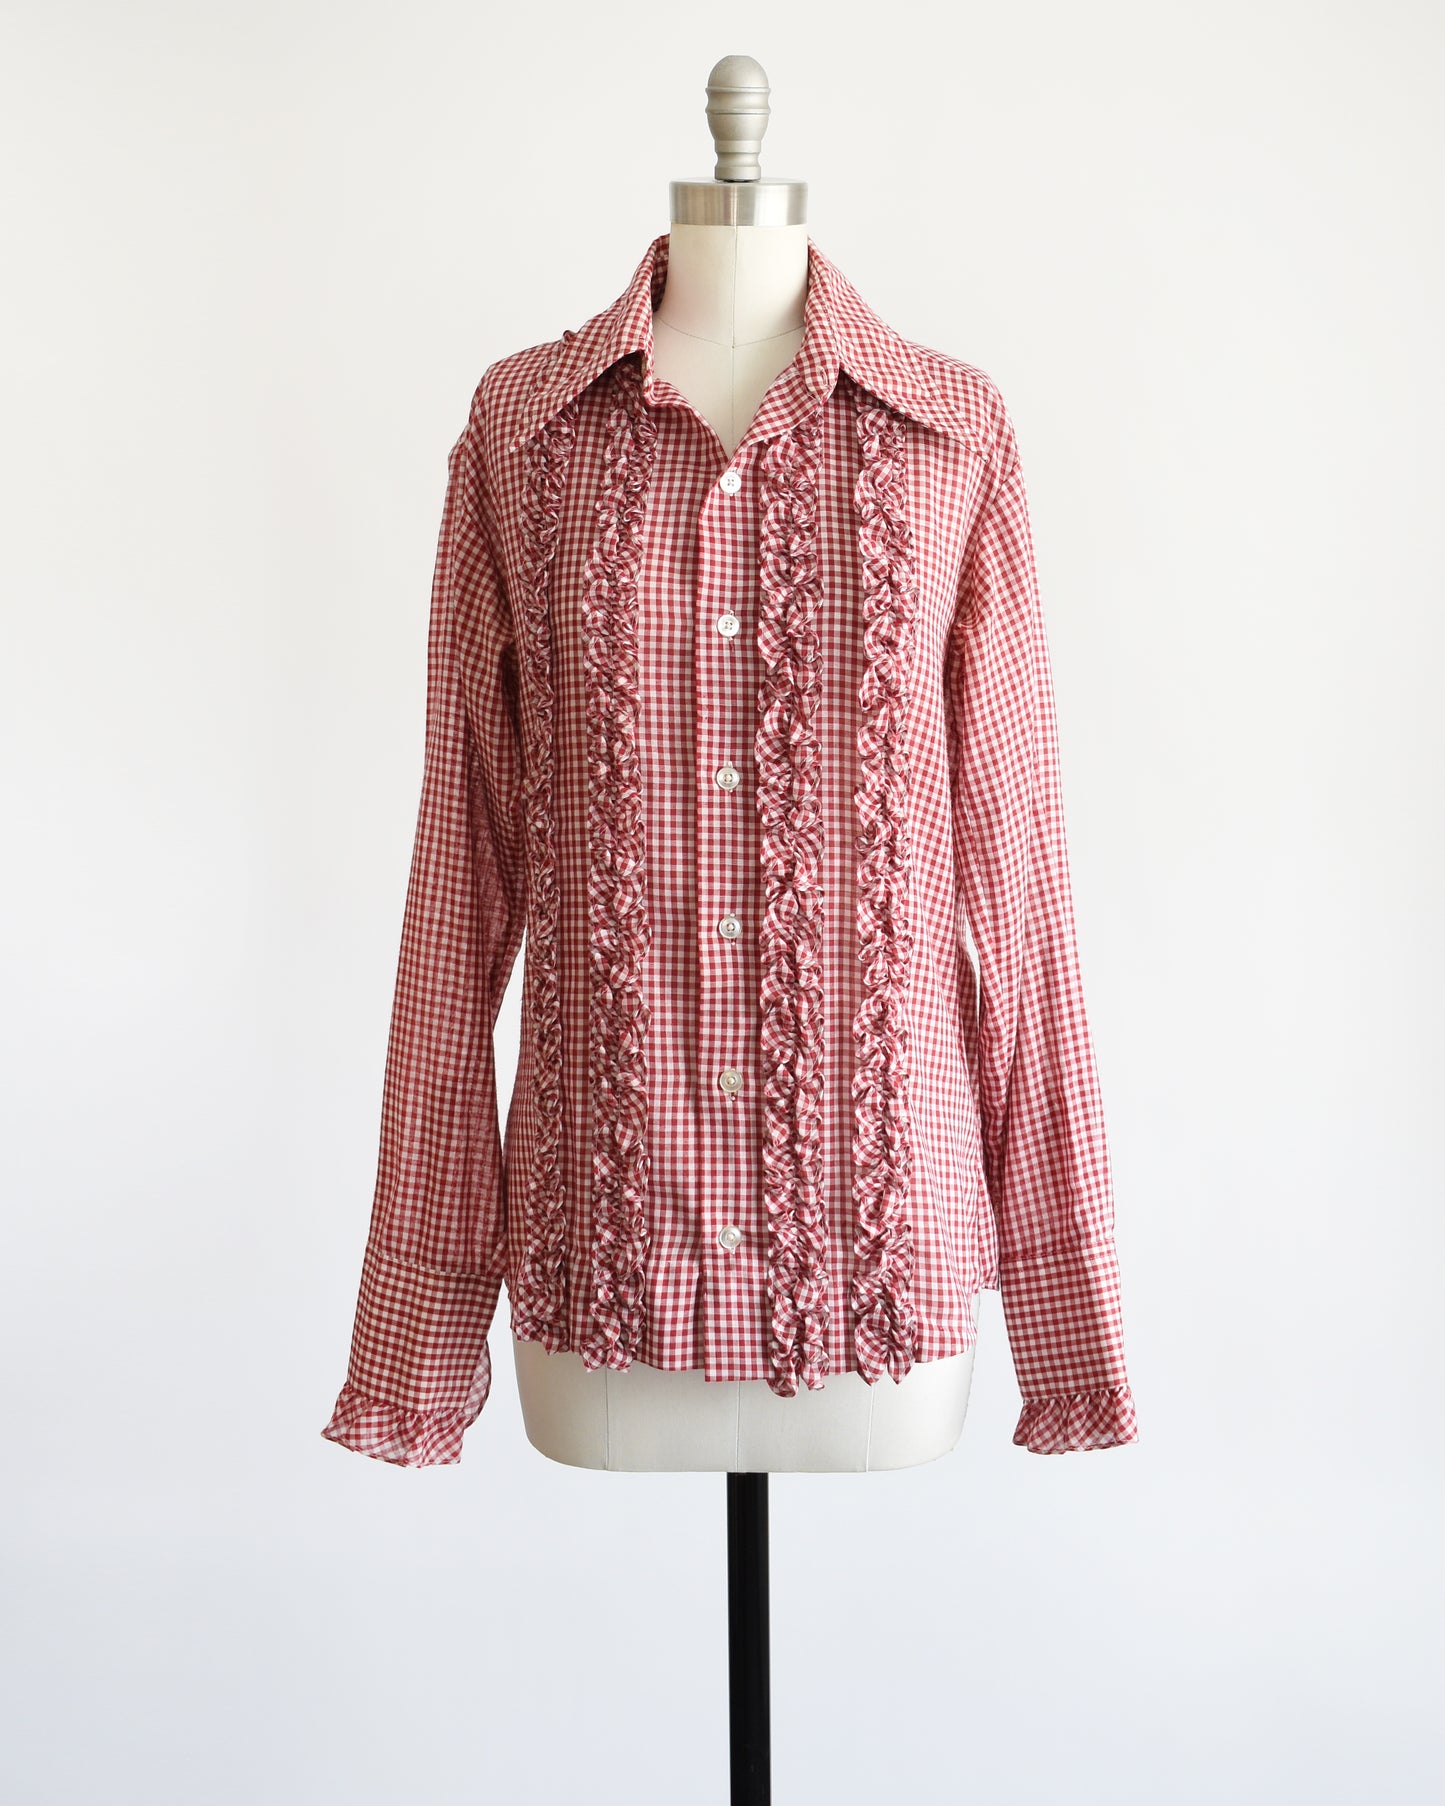 A vintage 1970s red and white gingham check with plastic buttons down the front and two on the ruffled cuffs